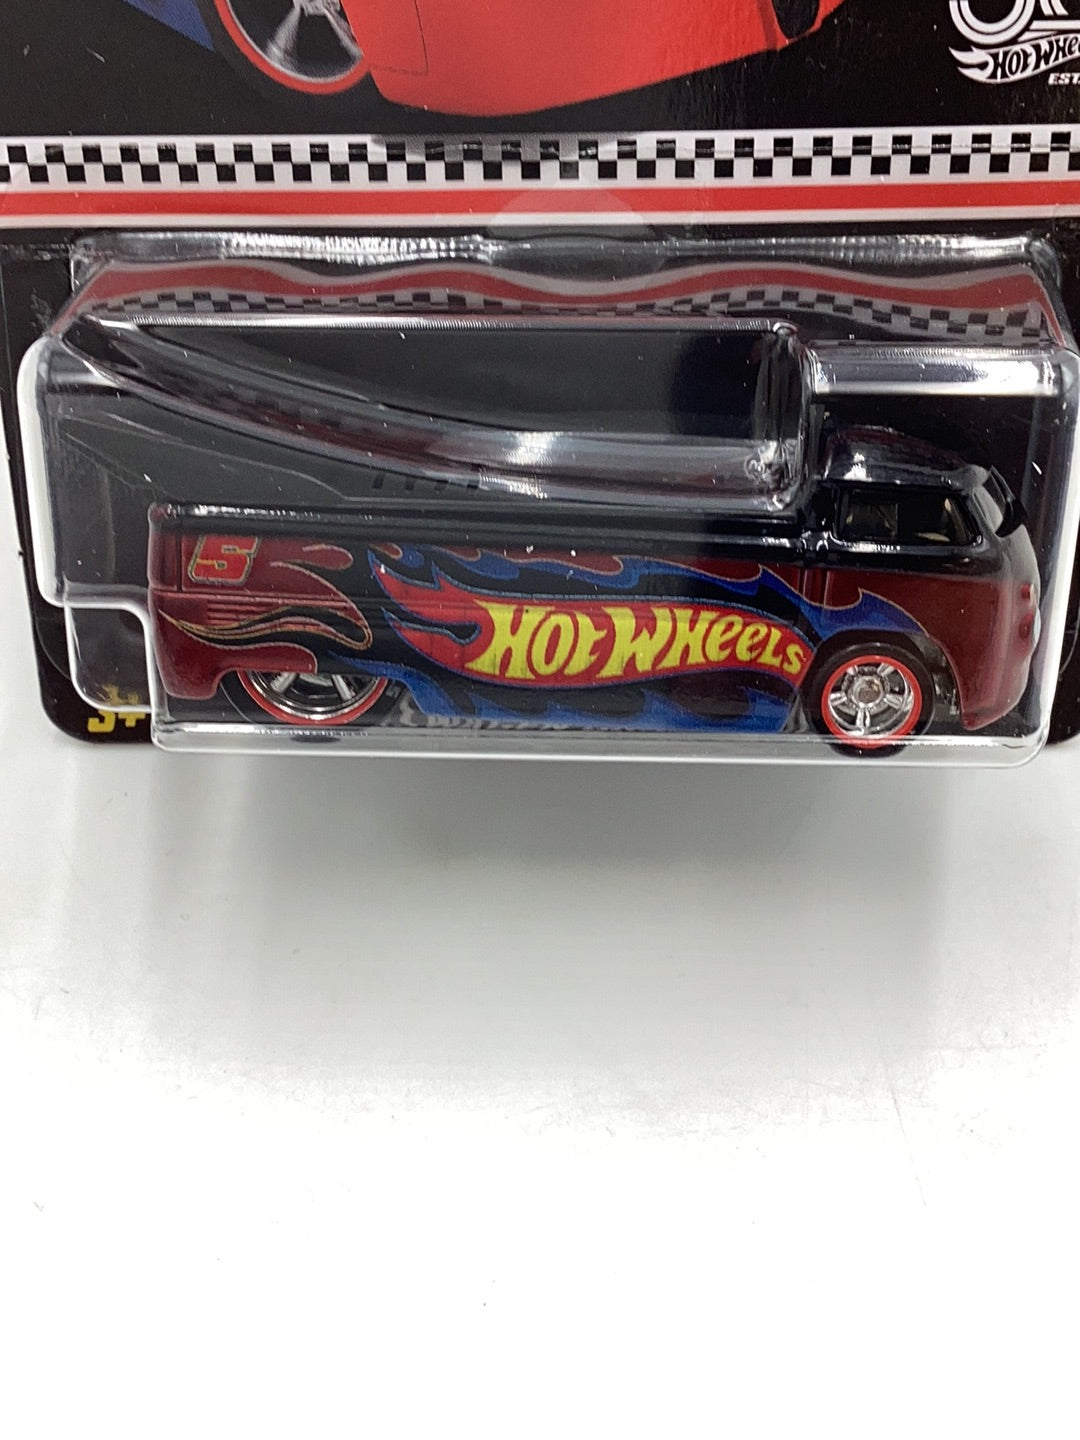 Hot wheels 2018 mail in collectors edition factory sealed sticker Volkswagen Drag Truck with protector